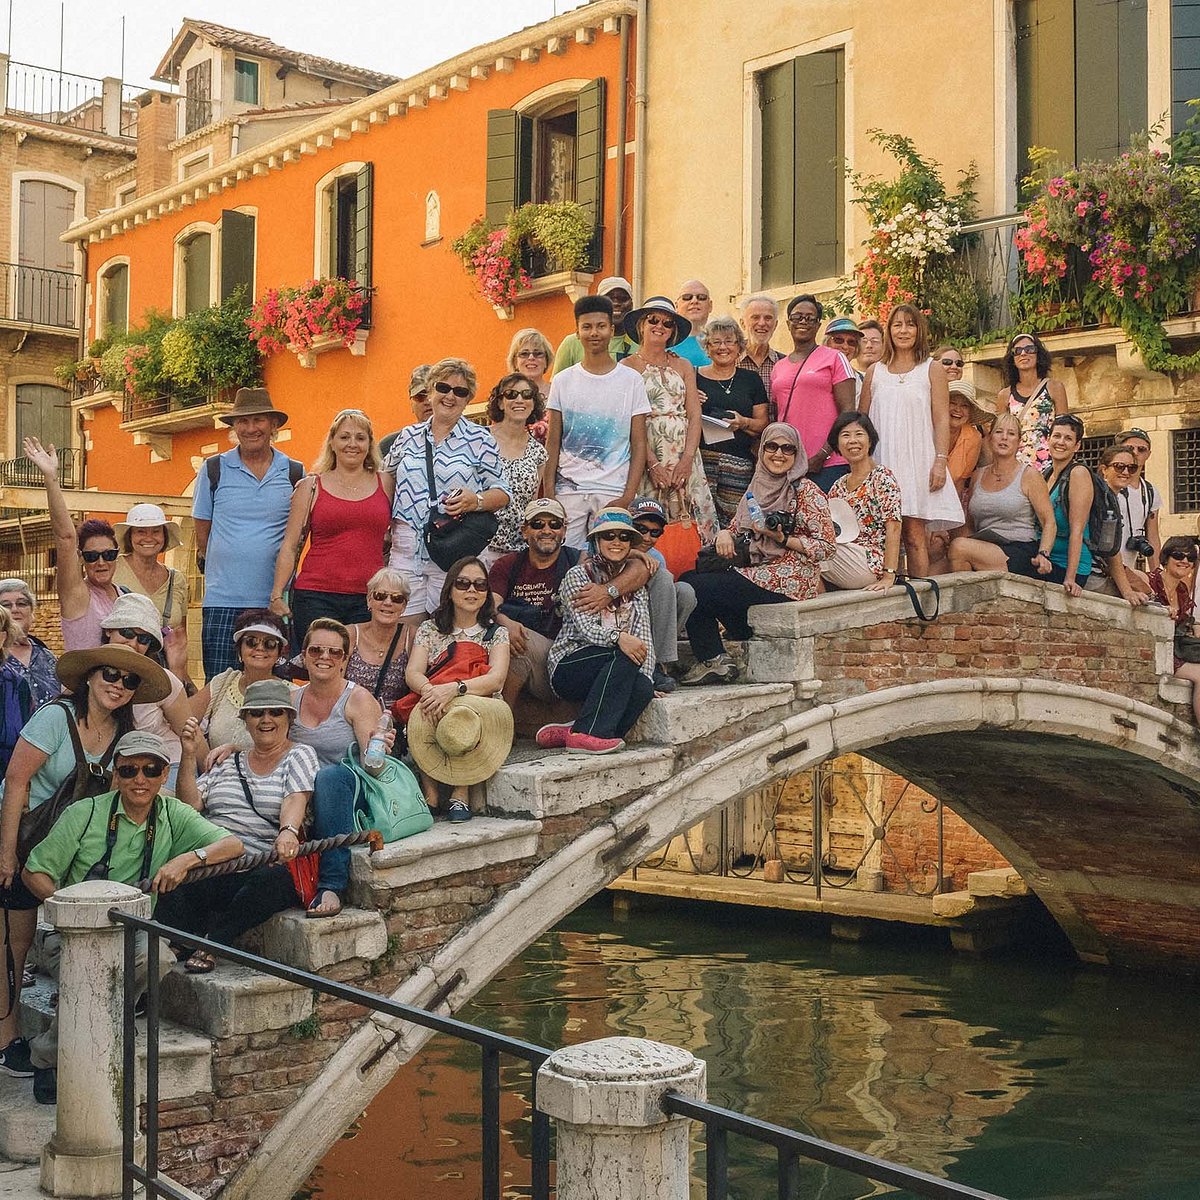 Cayred Clothing Reviews, European tour packages will see you connecting to  the real soul of the destinations you go, from the canals of Venice to the  countryside of France, and maybe even